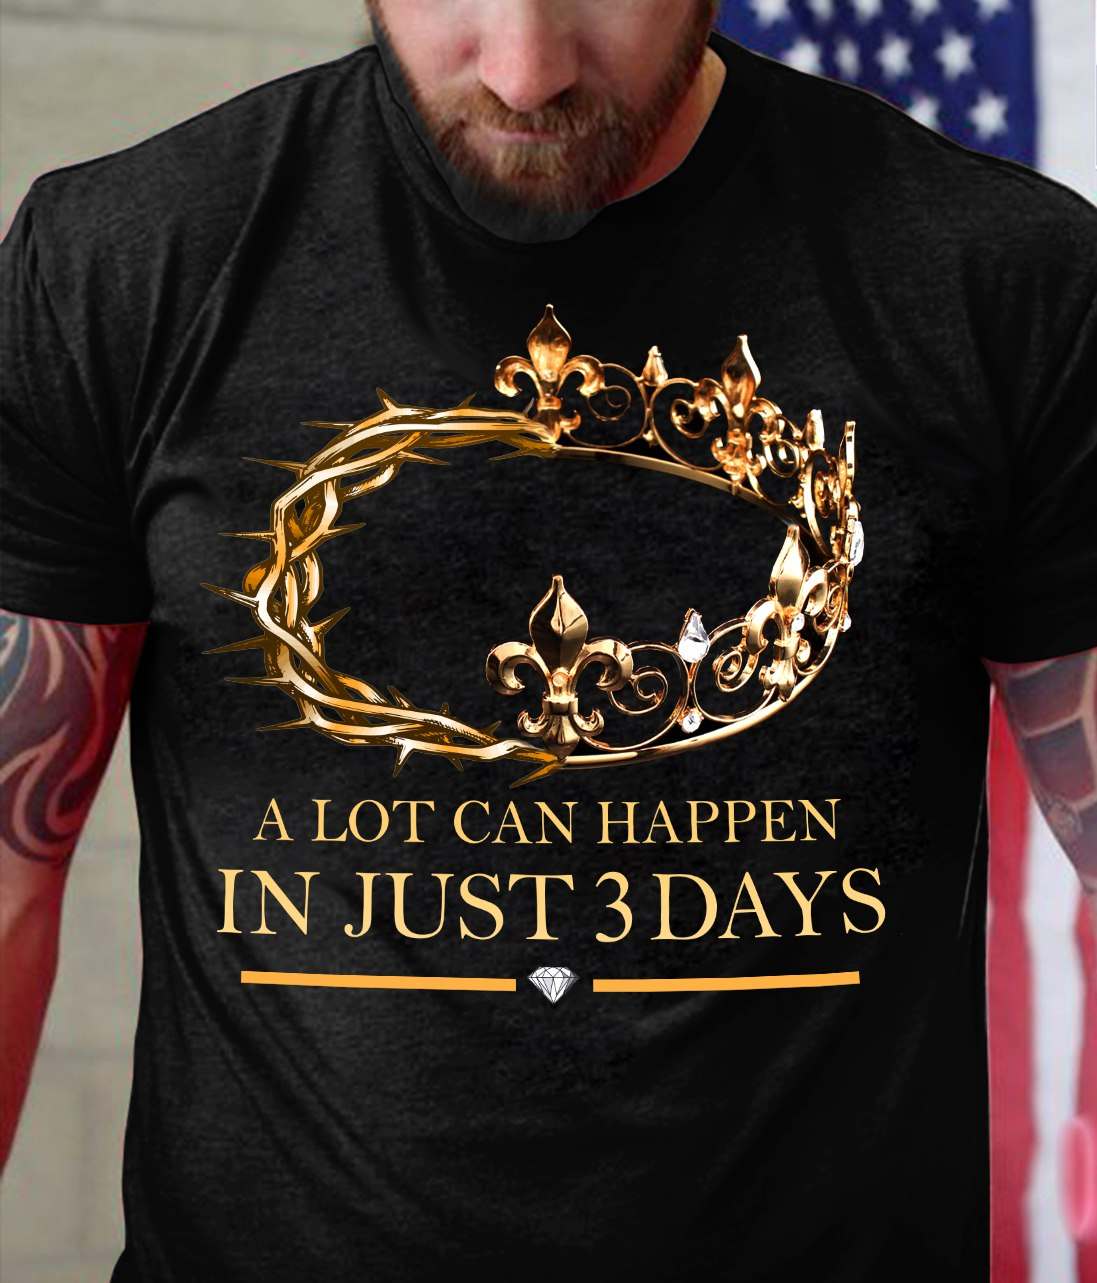 A lot can happen in just 3 days - King crown